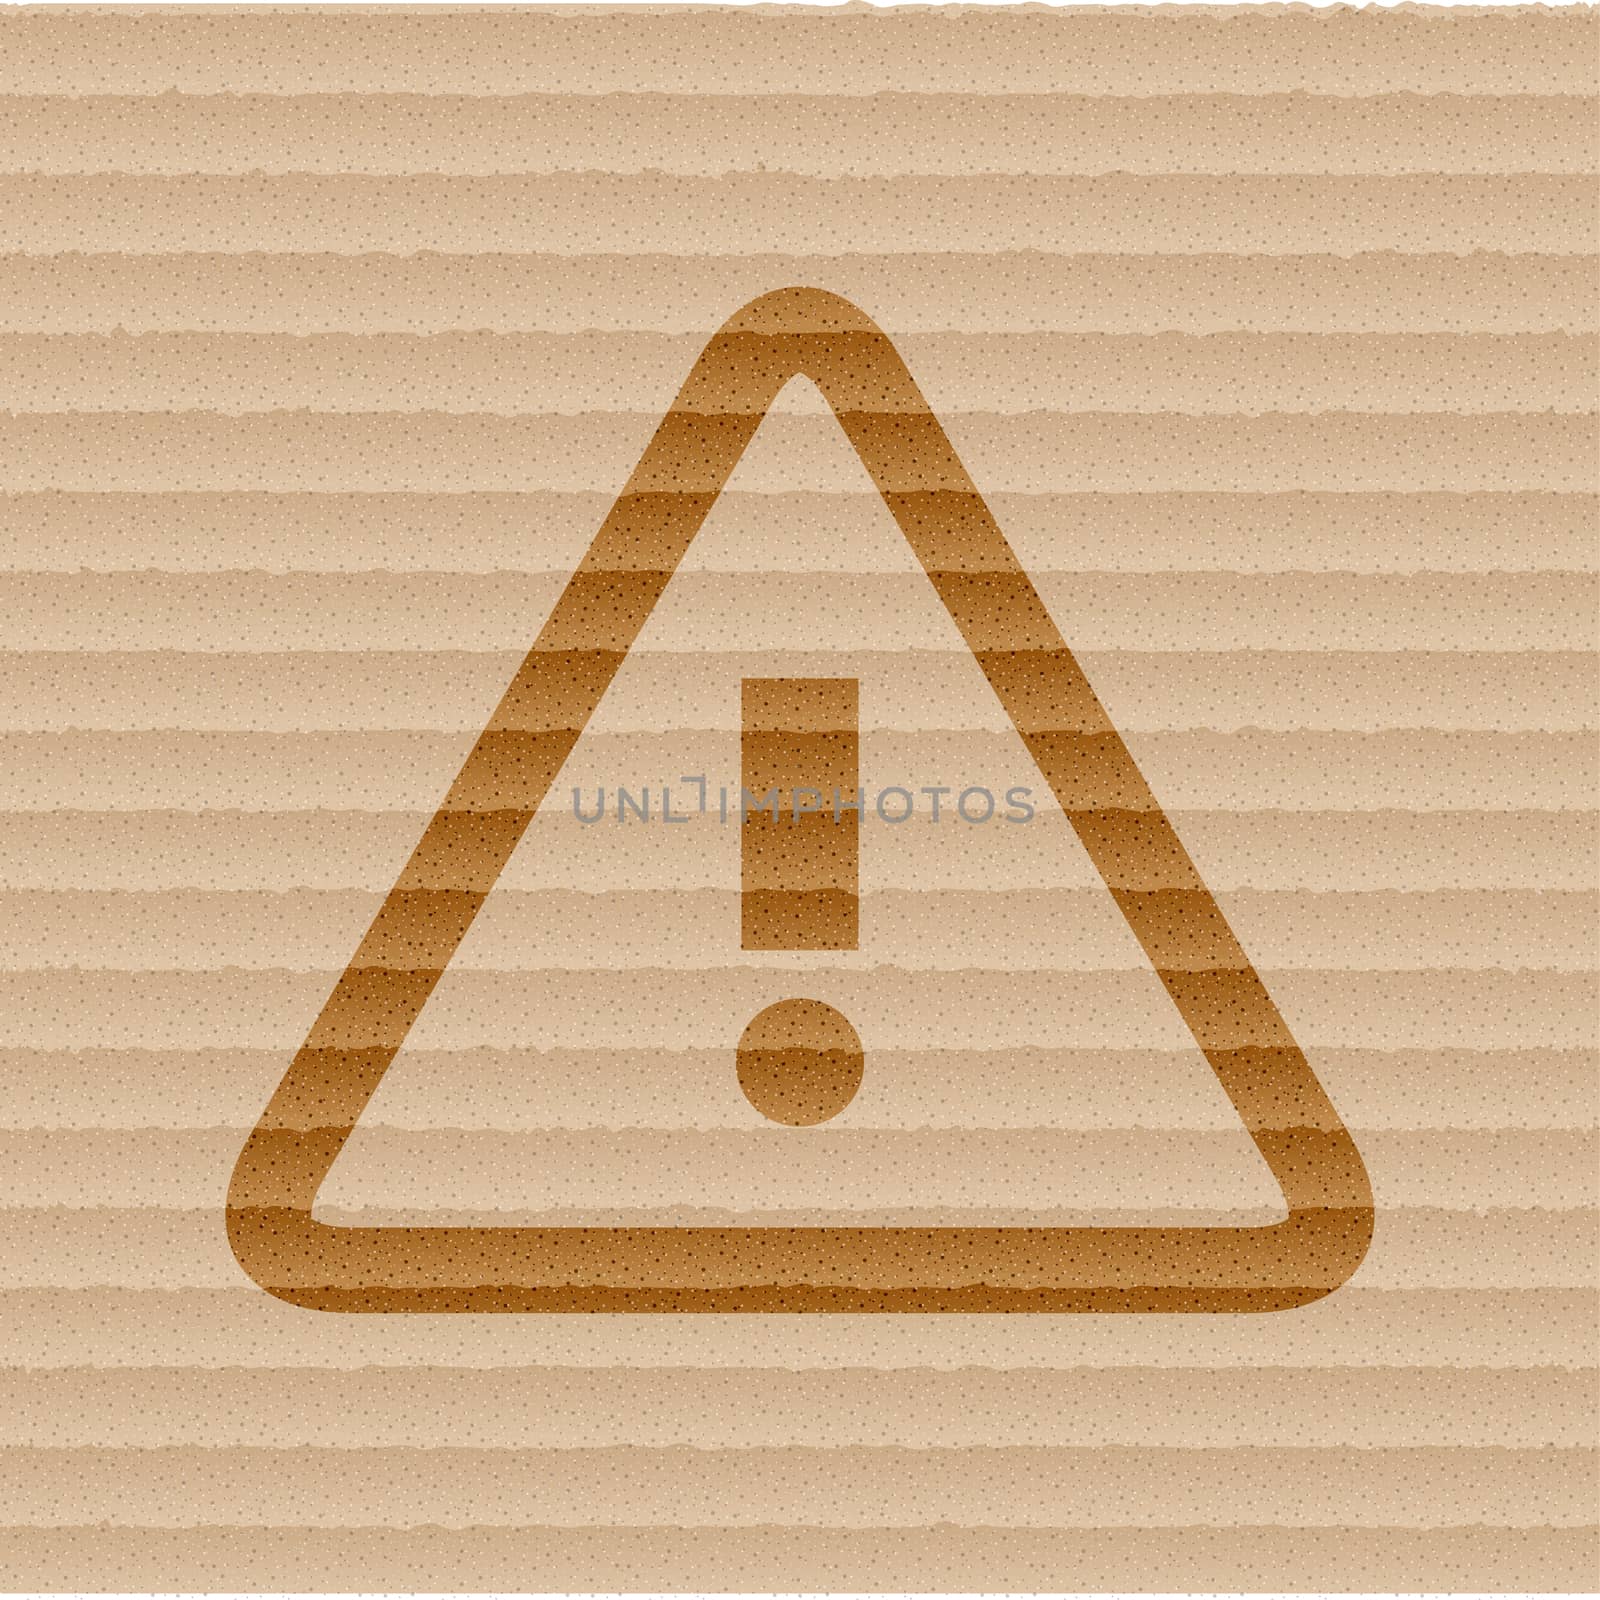 danger. exclamation mark icon flat design with abstract background.